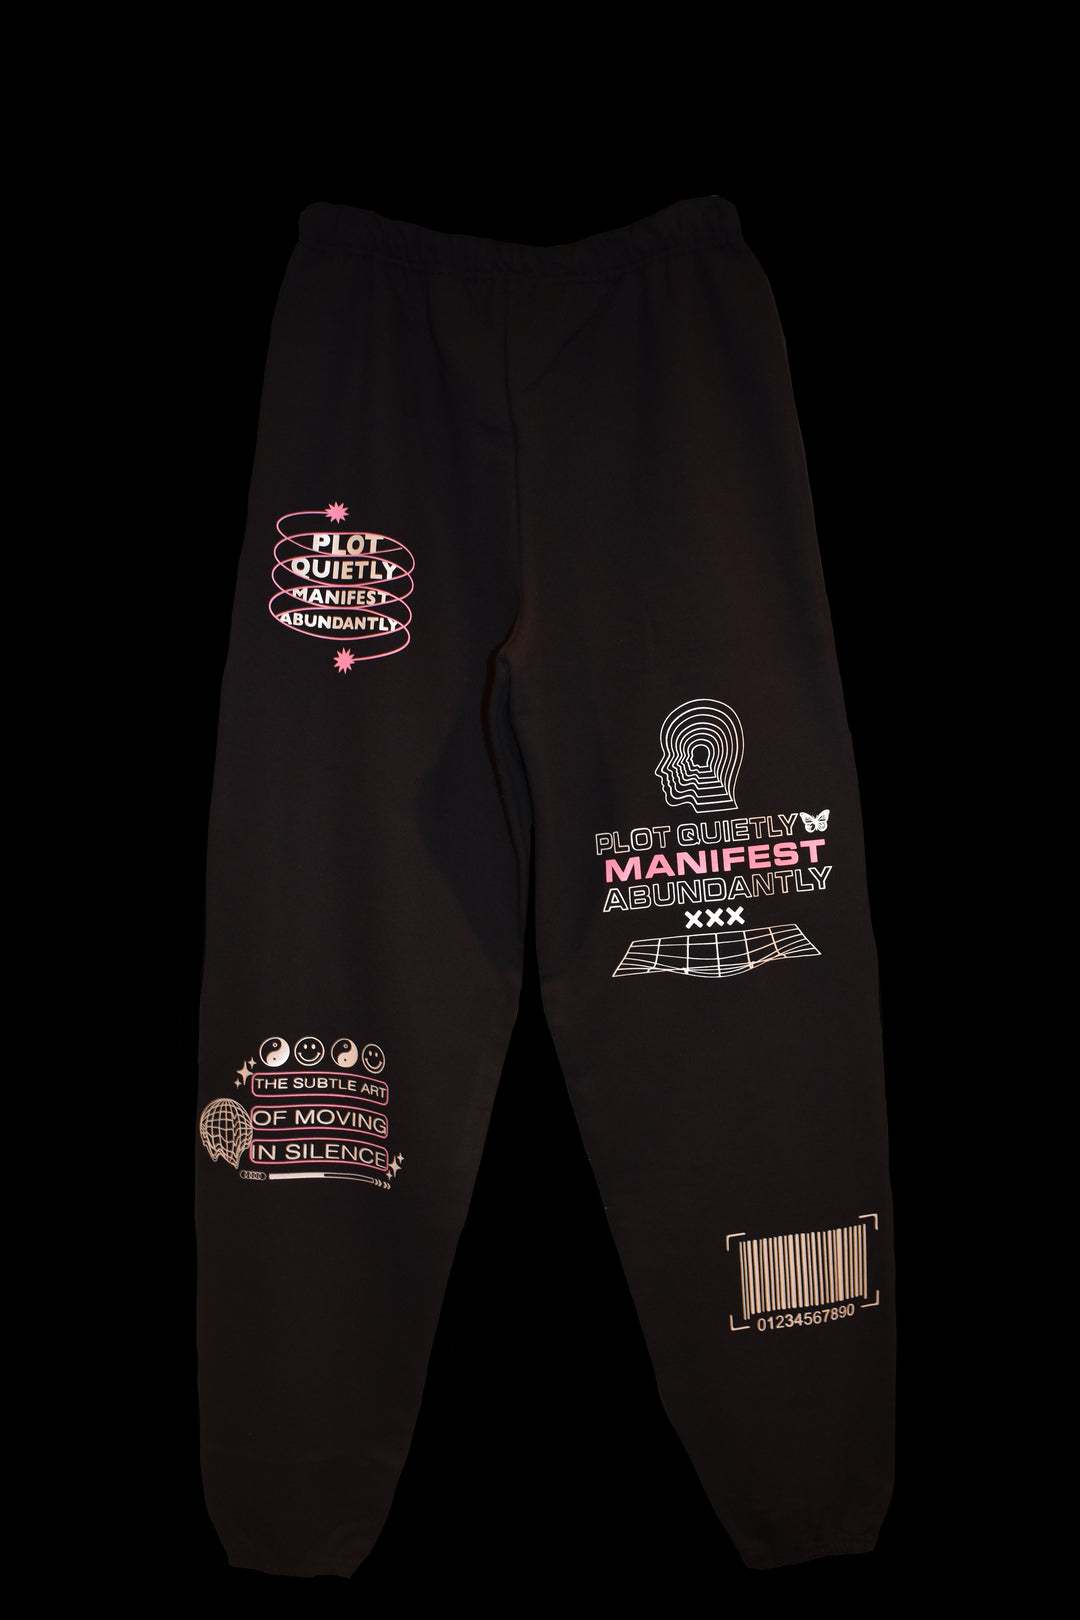 Mutual Attractions, Cozy warm and casual 😚 sweats also available in  black!